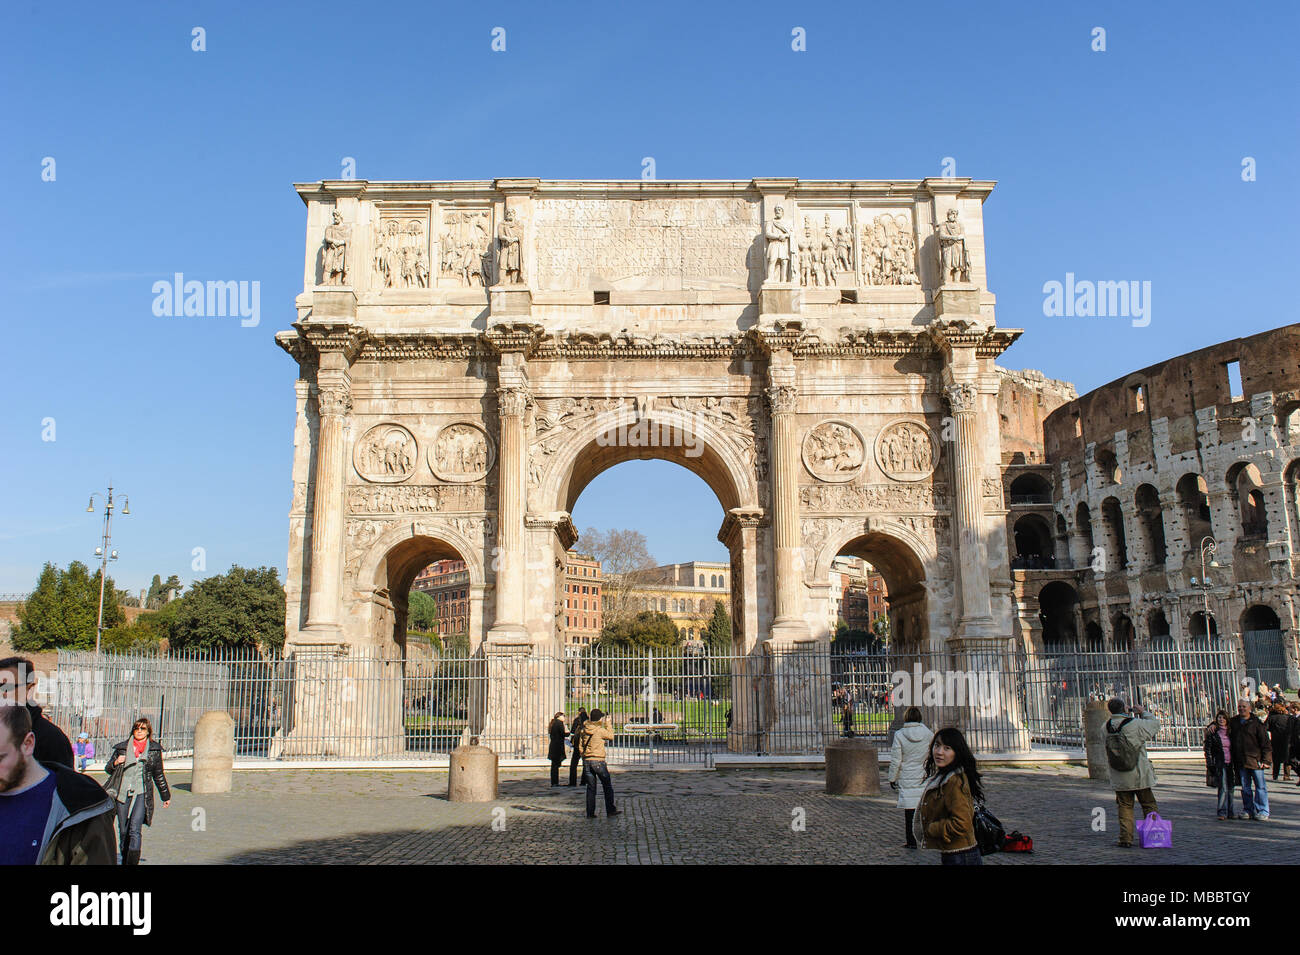 ROME, ITALY - JANUARY 21, 2010: Arch of Constantine is a triumphal arch in Rome near the colosseum and it is the lastest one of existing triumphal arc Stock Photo